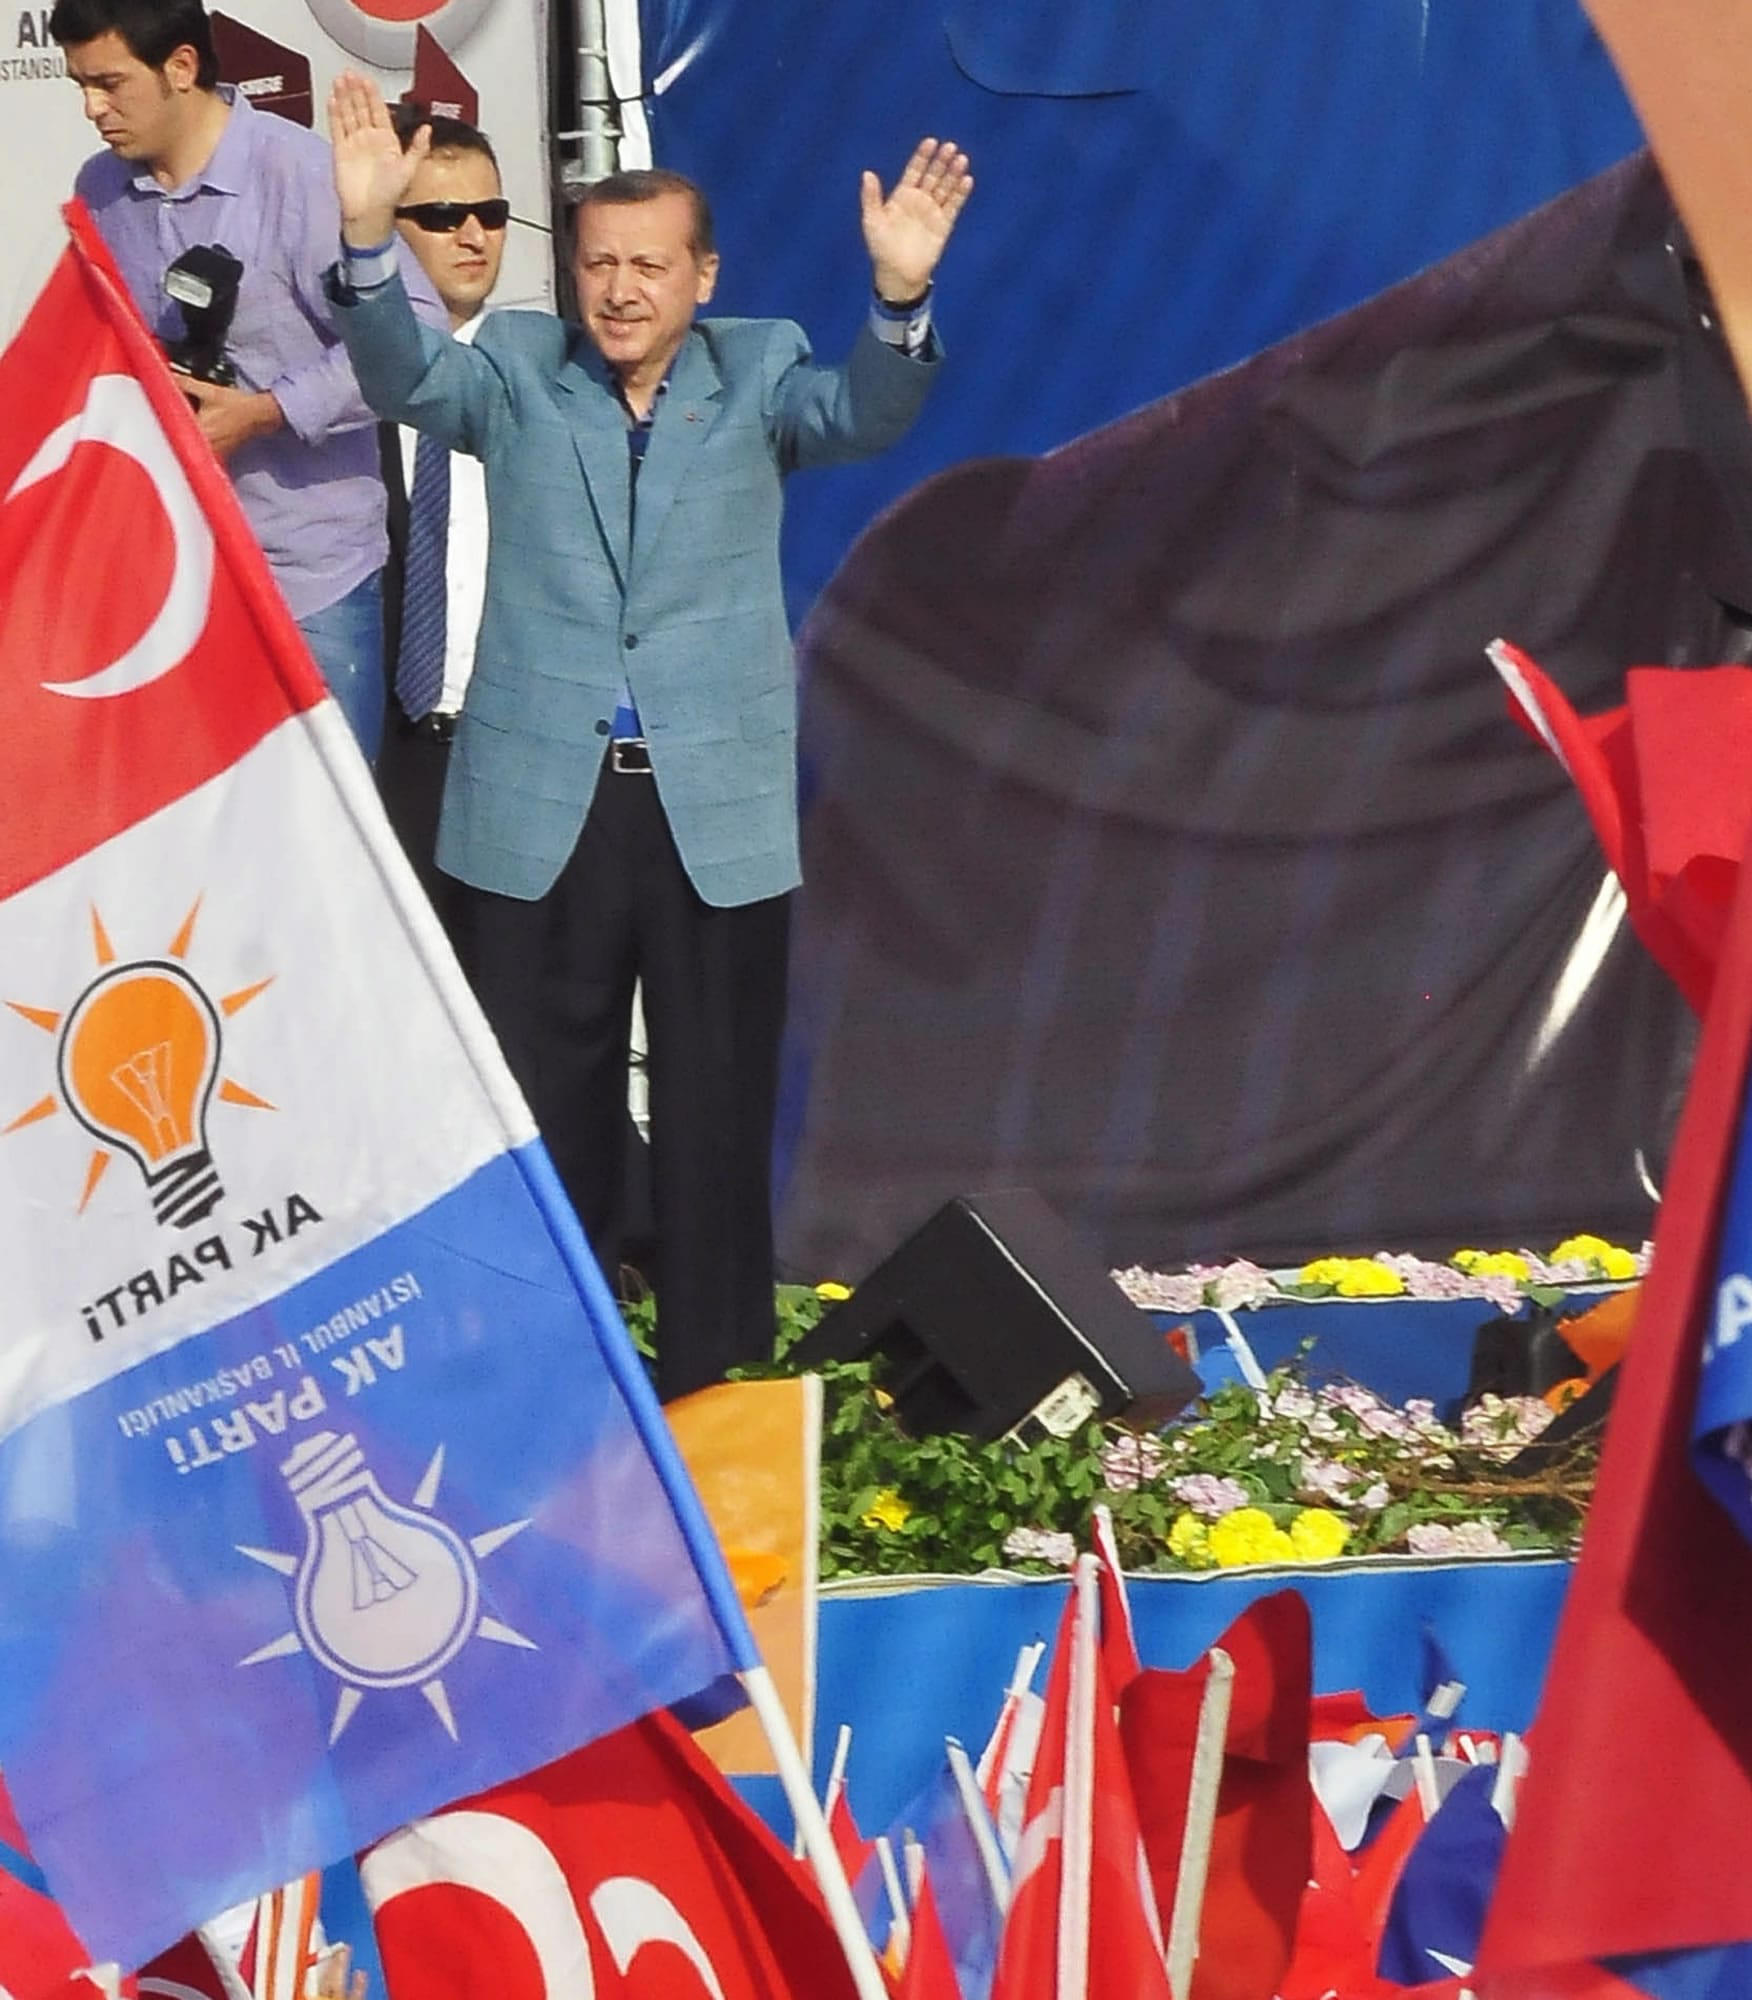 Associated Press
Turkish Prime Minister Recep Tayyip Erdogan salutes supporters Sunday during a party rally in Istanbul, Turkey.